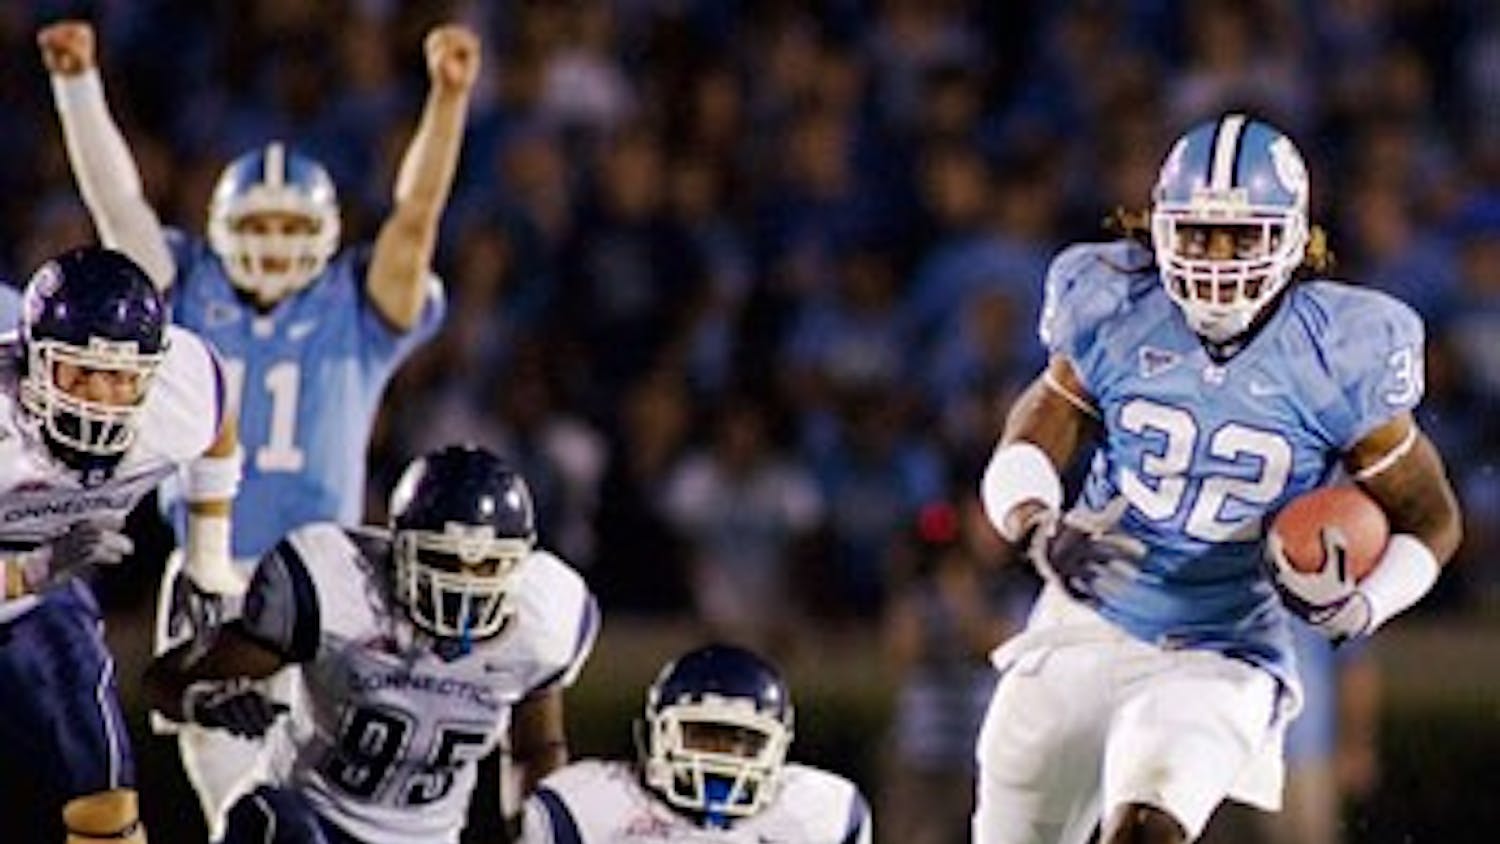 Ryan Houston (32) and the rest of the Tar Heels hope for a repeat victory against UConn in Storrs, Conn.